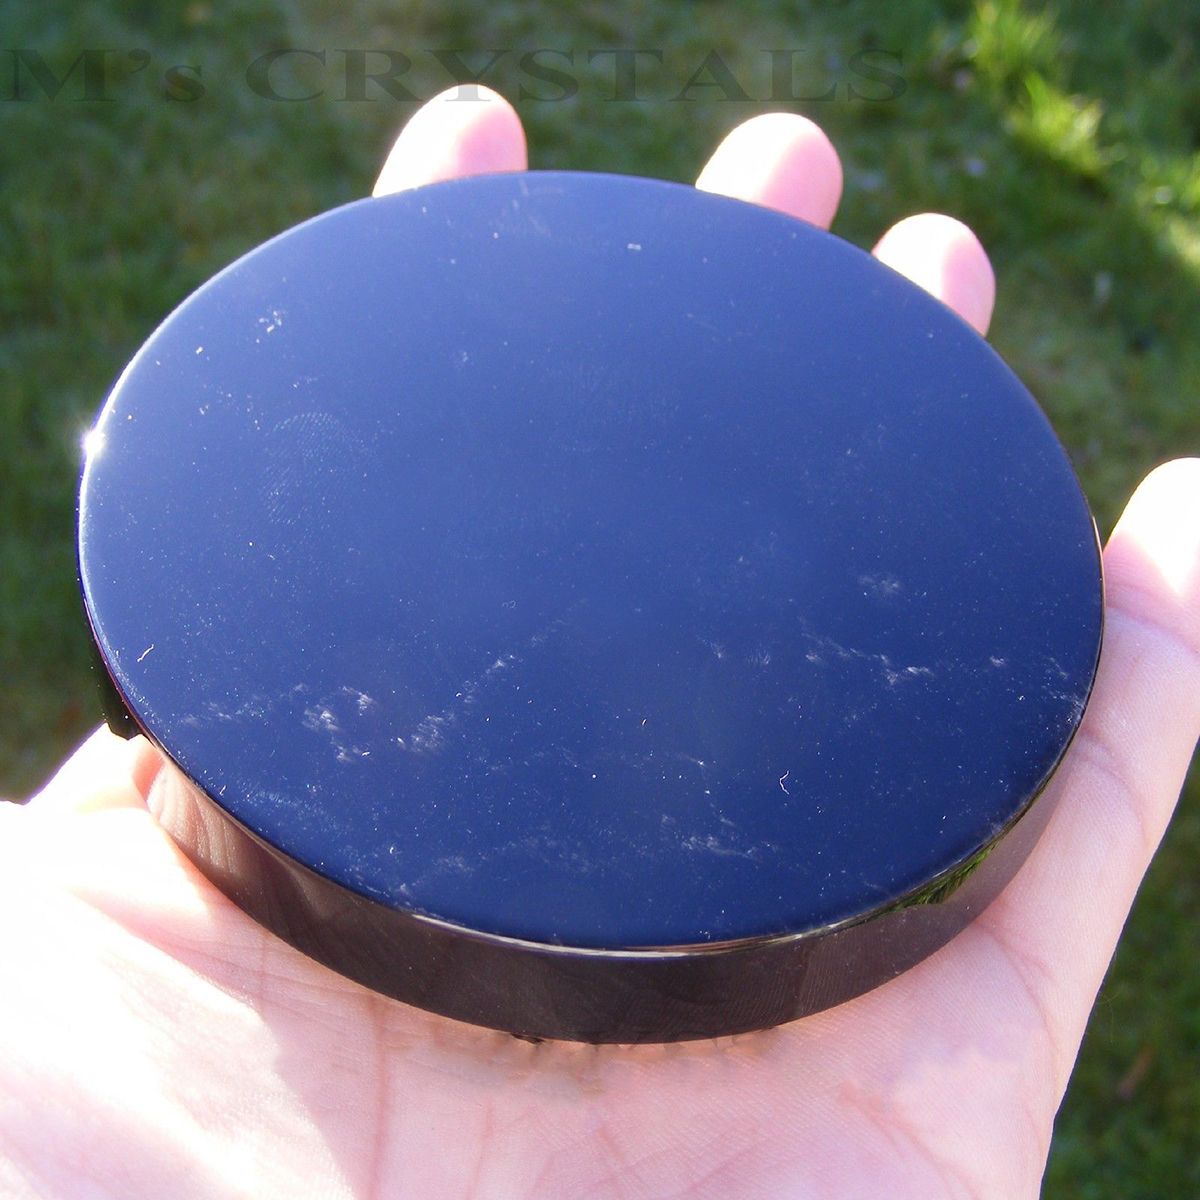 100mm-Black-Obsidian-Scrying-Mirror-Crystal-Crystals-Seconds-Gemstone-Mineral-1455687